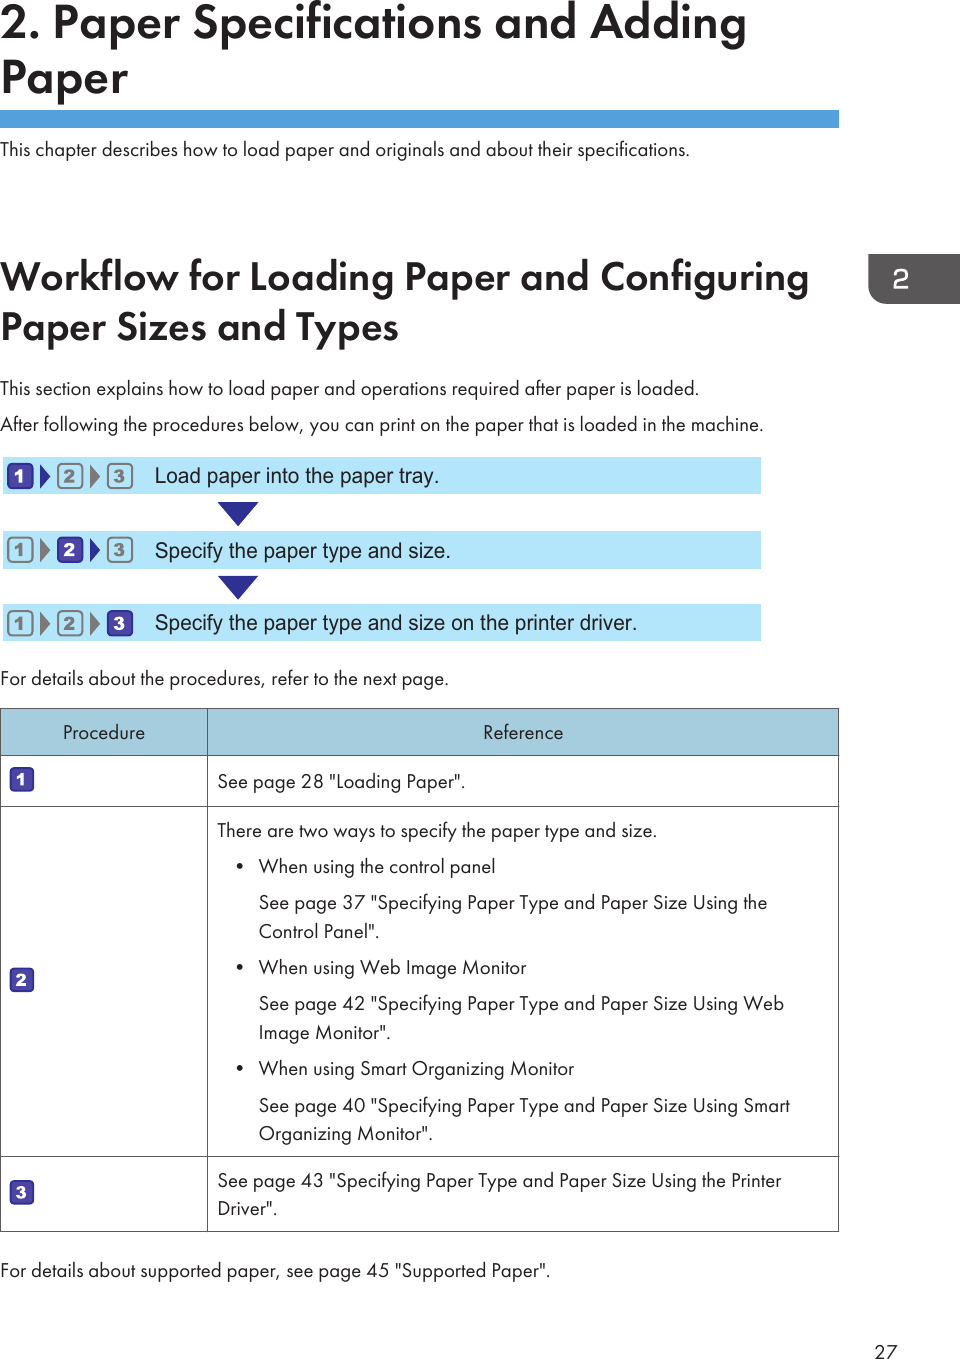 2. Paper Specifications and AddingPaperThis chapter describes how to load paper and originals and about their specifications.Workflow for Loading Paper and ConfiguringPaper Sizes and TypesThis section explains how to load paper and operations required after paper is loaded.After following the procedures below, you can print on the paper that is loaded in the machine.Load paper into the paper tray.Specify the paper type and size.Specify the paper type and size on the printer driver.For details about the procedures, refer to the next page.Procedure ReferenceSee page 28 &quot;Loading Paper&quot;.There are two ways to specify the paper type and size.• When using the control panelSee page 37 &quot;Specifying Paper Type and Paper Size Using theControl Panel&quot;.• When using Web Image MonitorSee page 42 &quot;Specifying Paper Type and Paper Size Using WebImage Monitor&quot;.• When using Smart Organizing MonitorSee page 40 &quot;Specifying Paper Type and Paper Size Using SmartOrganizing Monitor&quot;.See page 43 &quot;Specifying Paper Type and Paper Size Using the PrinterDriver&quot;.For details about supported paper, see page 45 &quot;Supported Paper&quot;.27